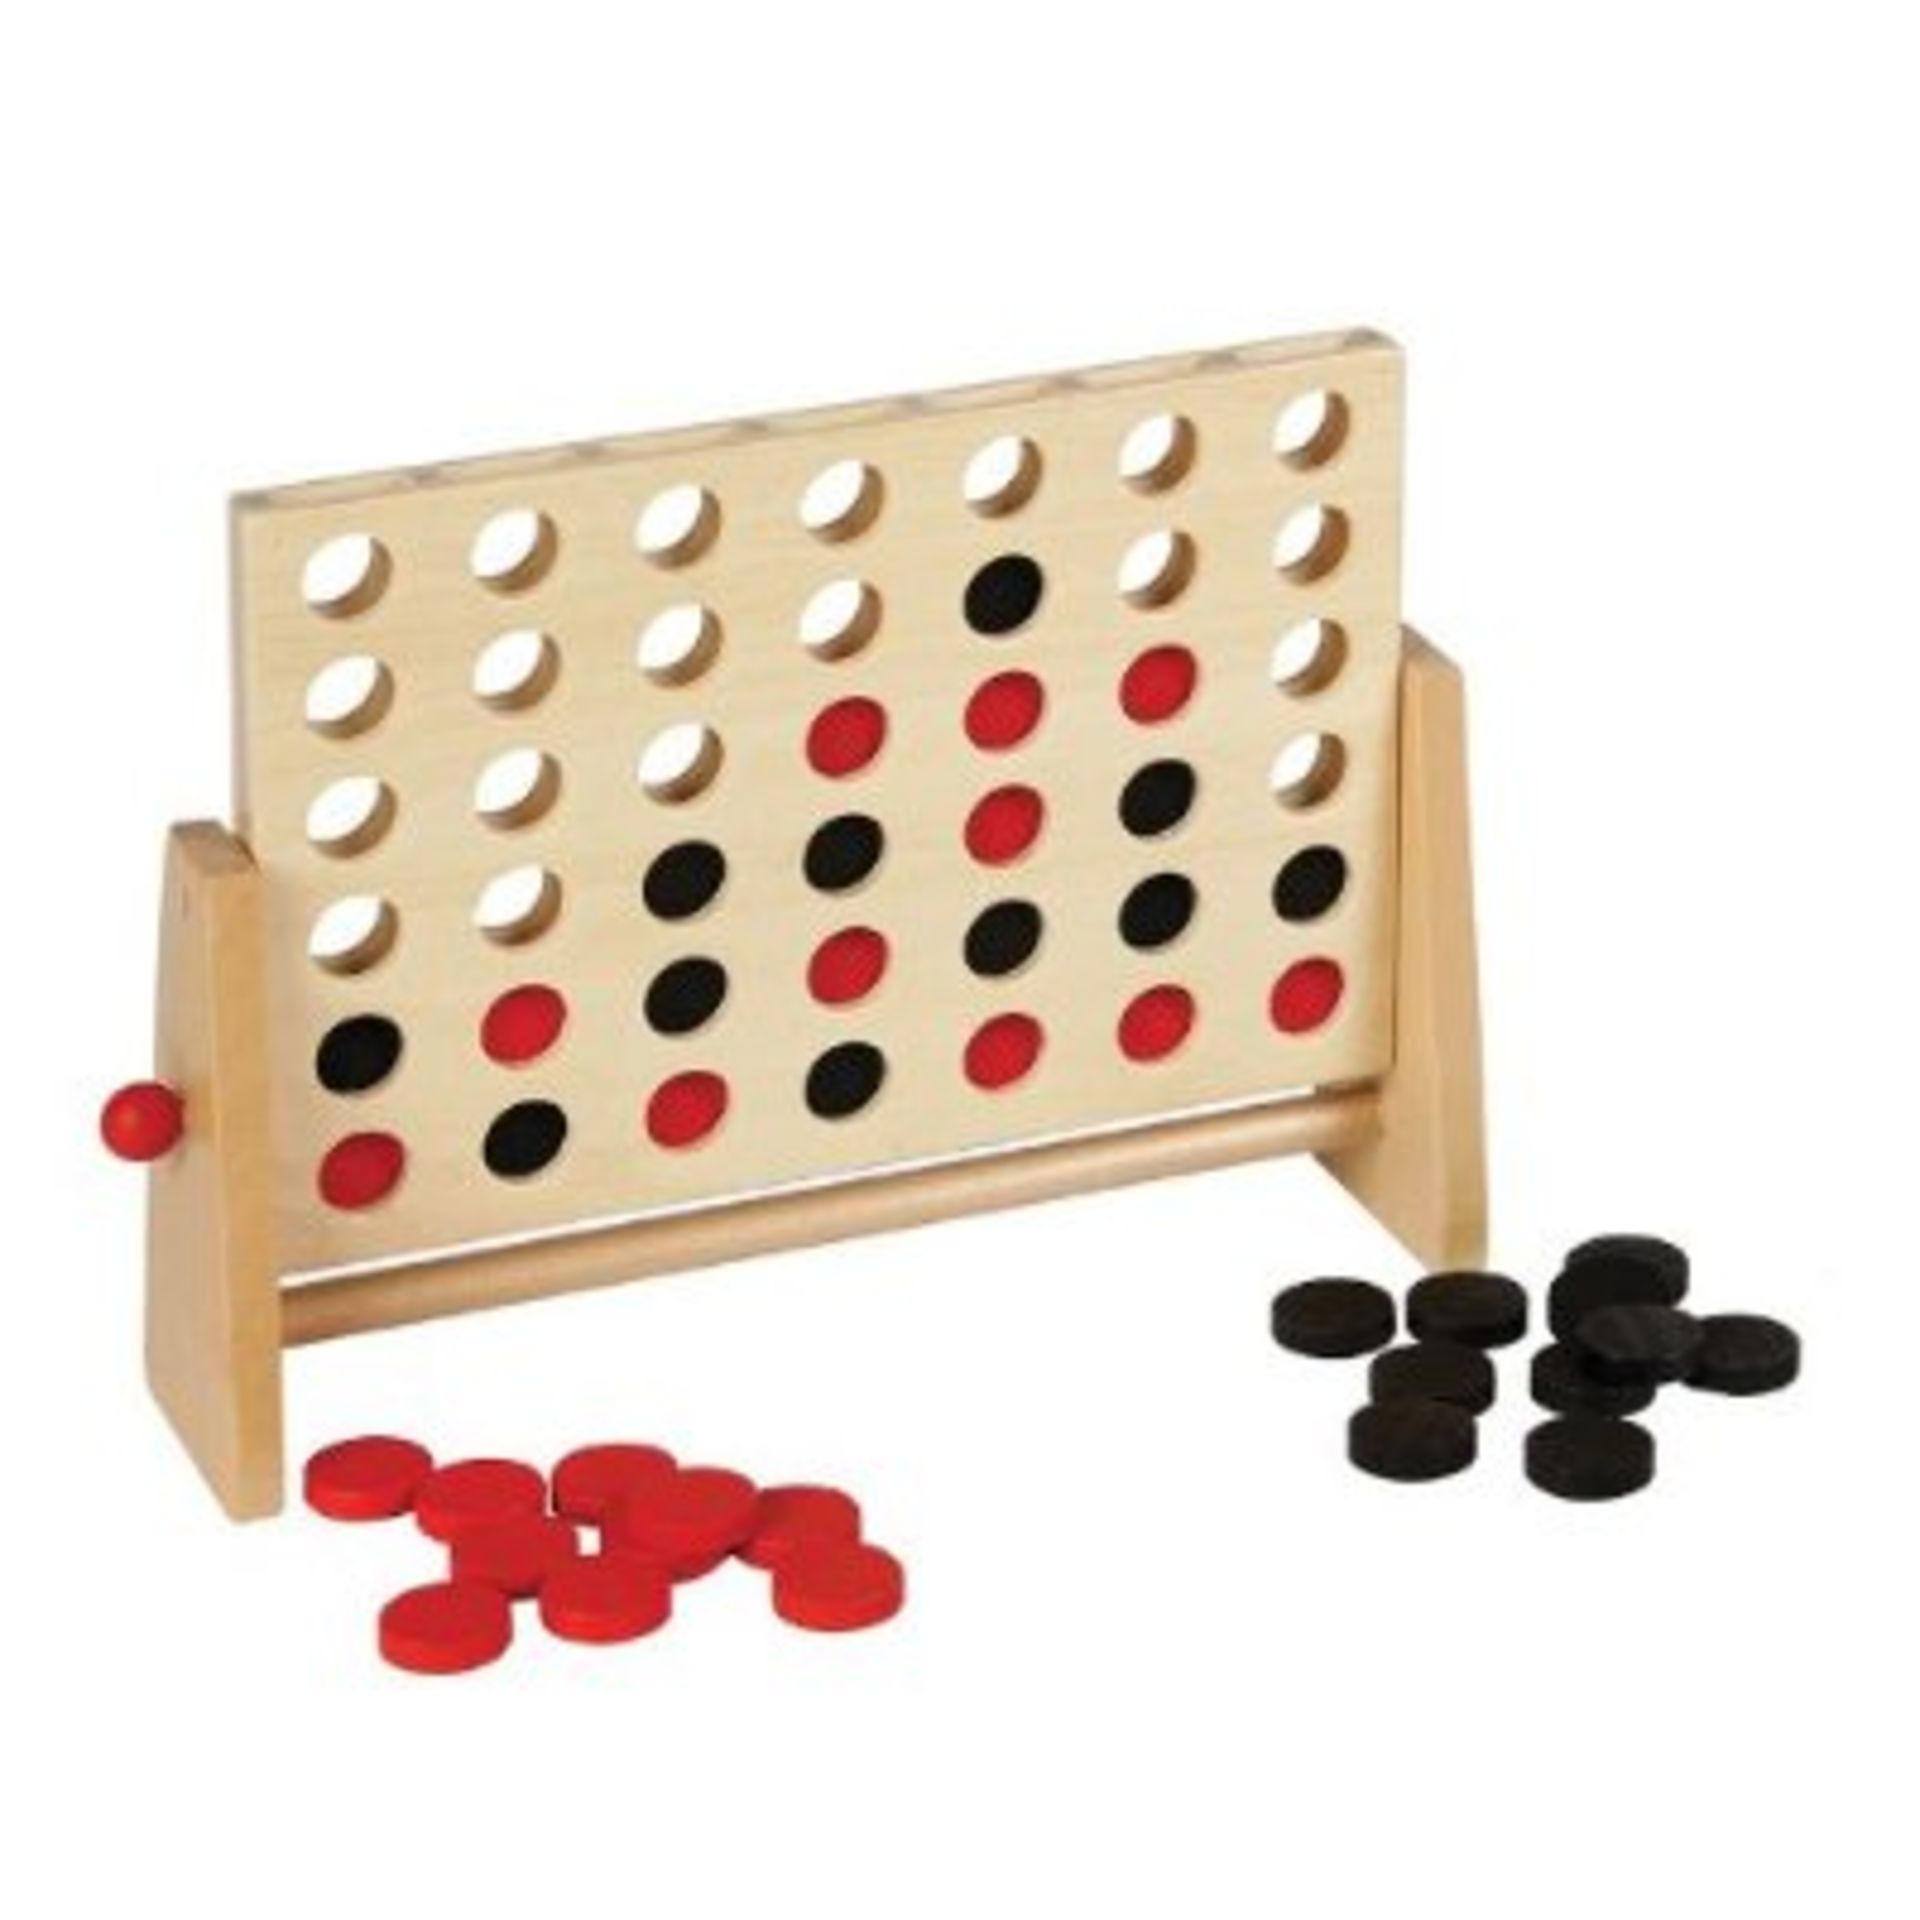 V *TRADE QTY* Brand New Wooden Connect 4 In A Row Game On Swivel Stand X 8 YOUR BID PRICE TO BE